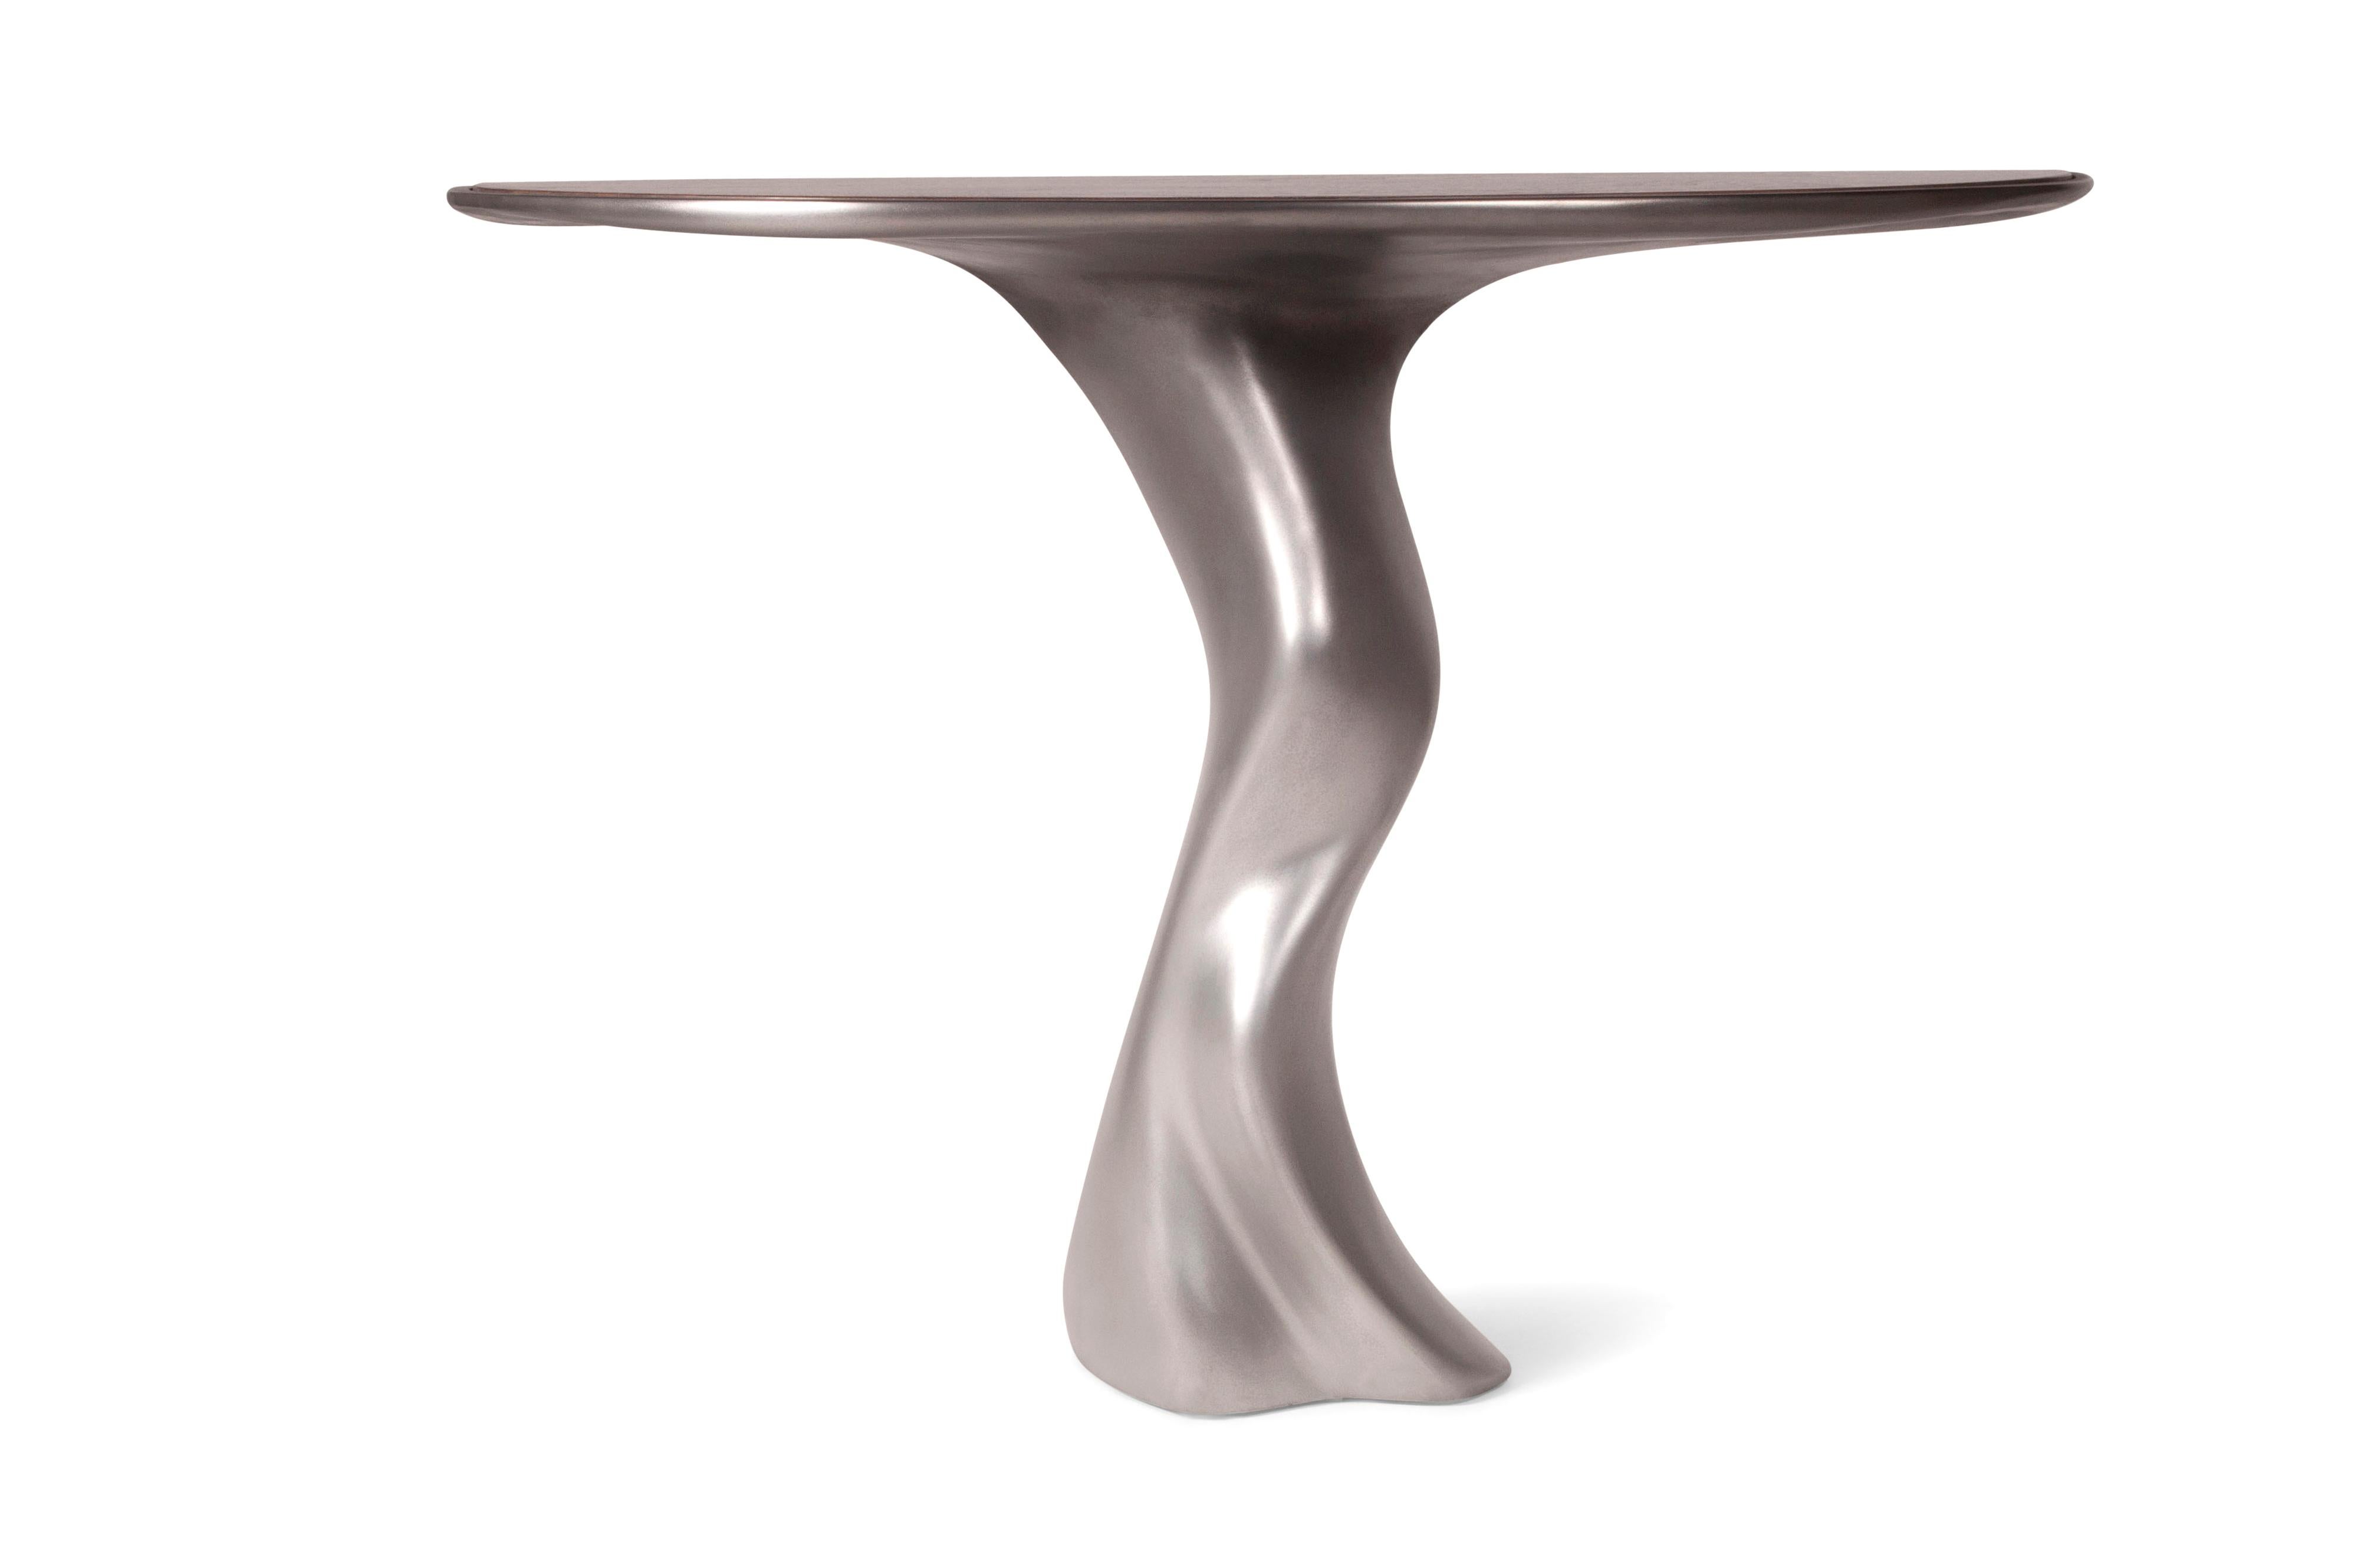 Haya console table is a stylish futuristic sculptural art table with a organic form designed and manufactured by Amorph. Haya console table is made out of wMDF with stainless steel finished.
The dimension of the piece can be modified upon your